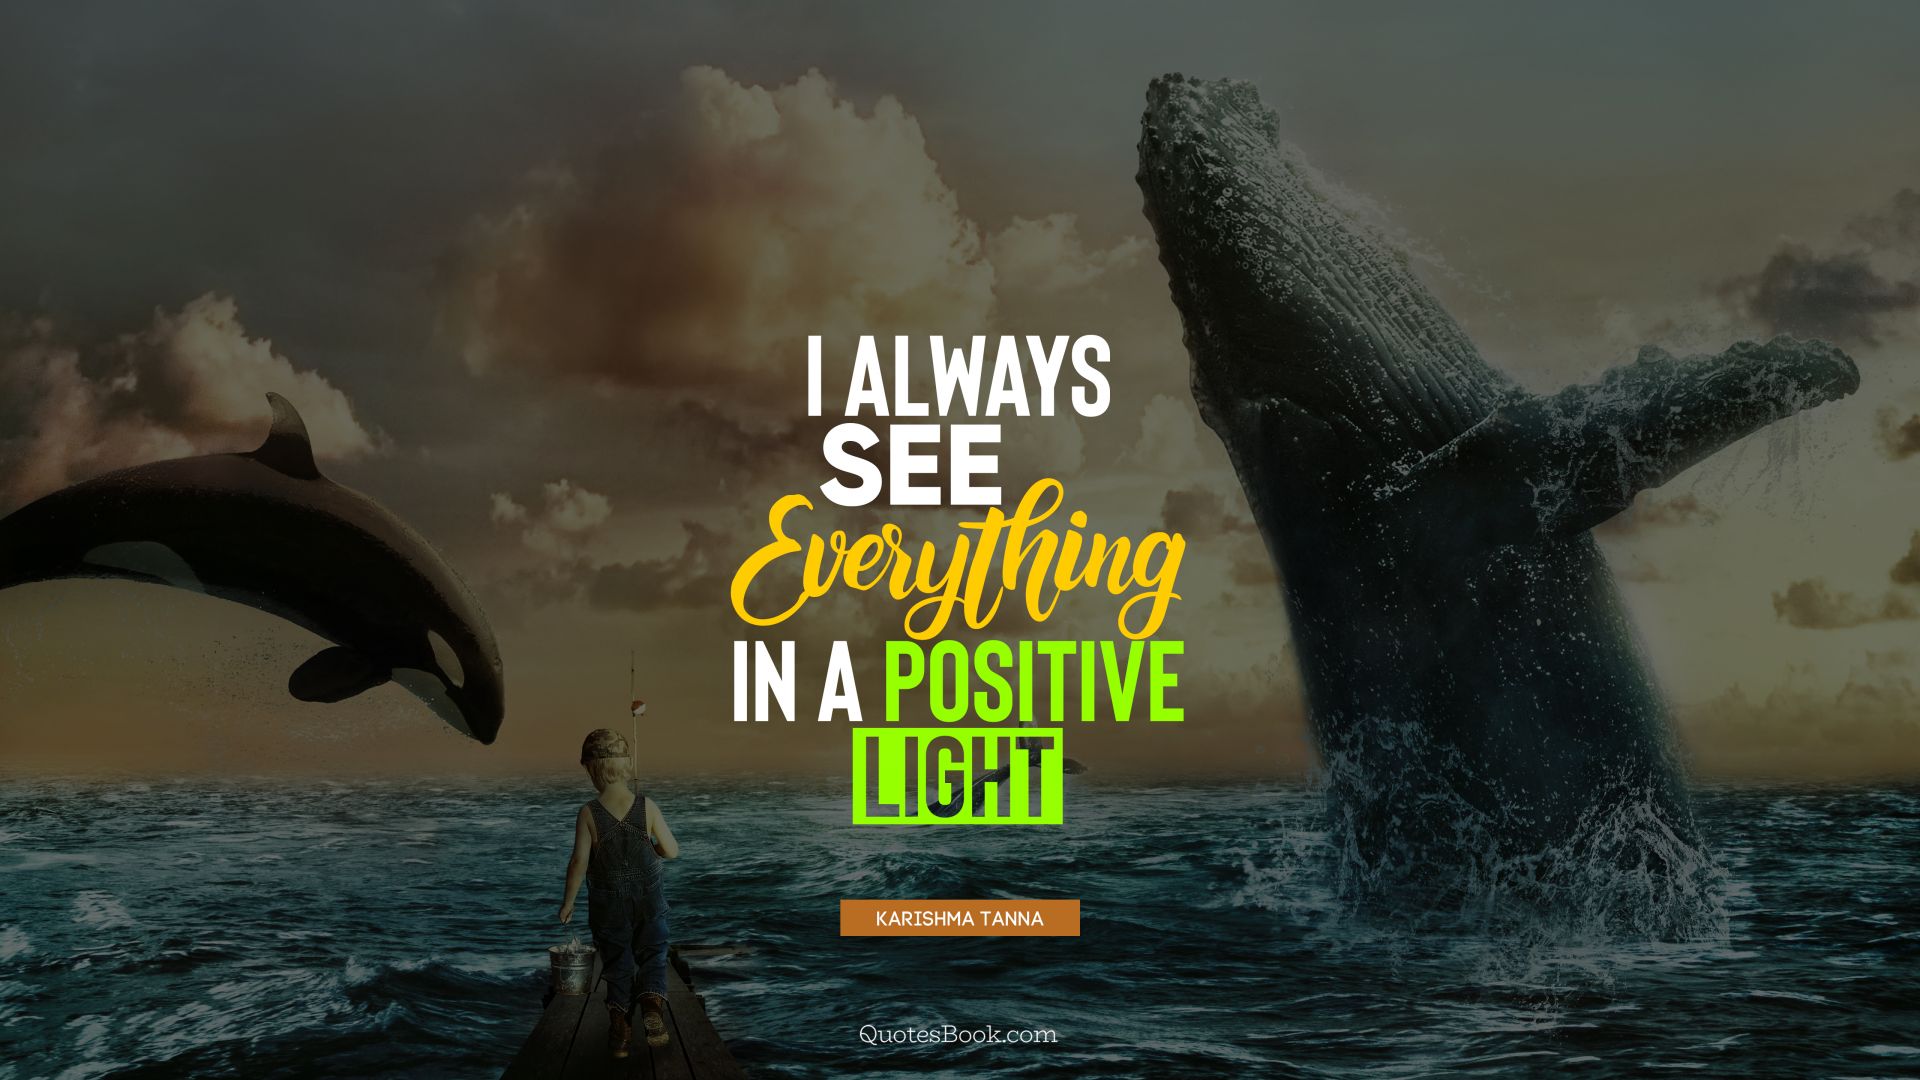 I always see everything in a positive light. - Quote by Karishma Tanna